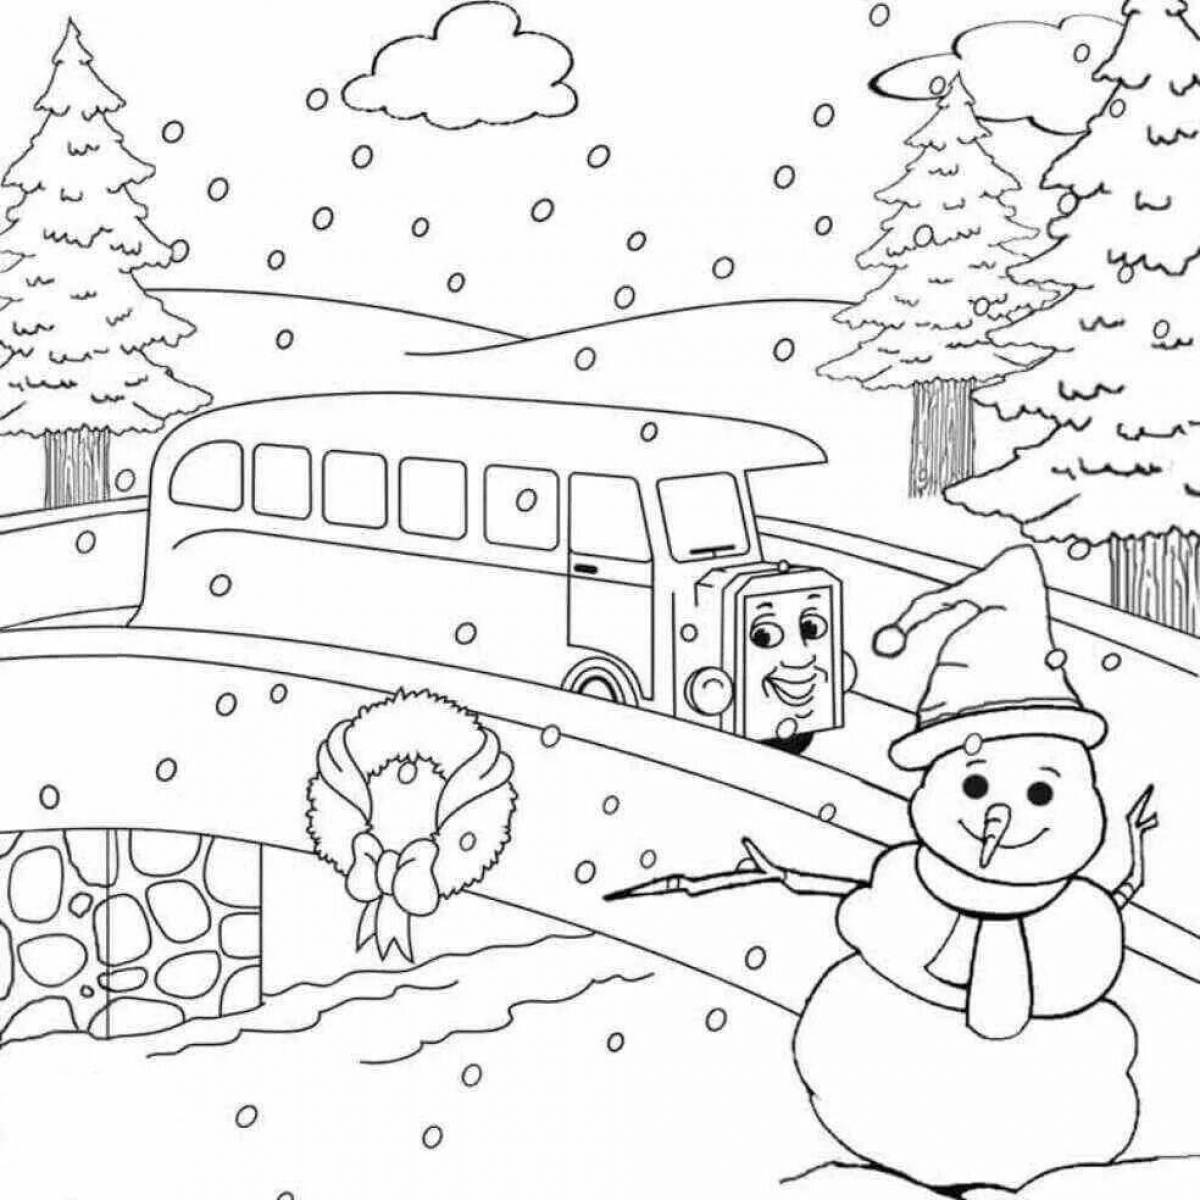 Fabulous January coloring book for children 6-7 years old